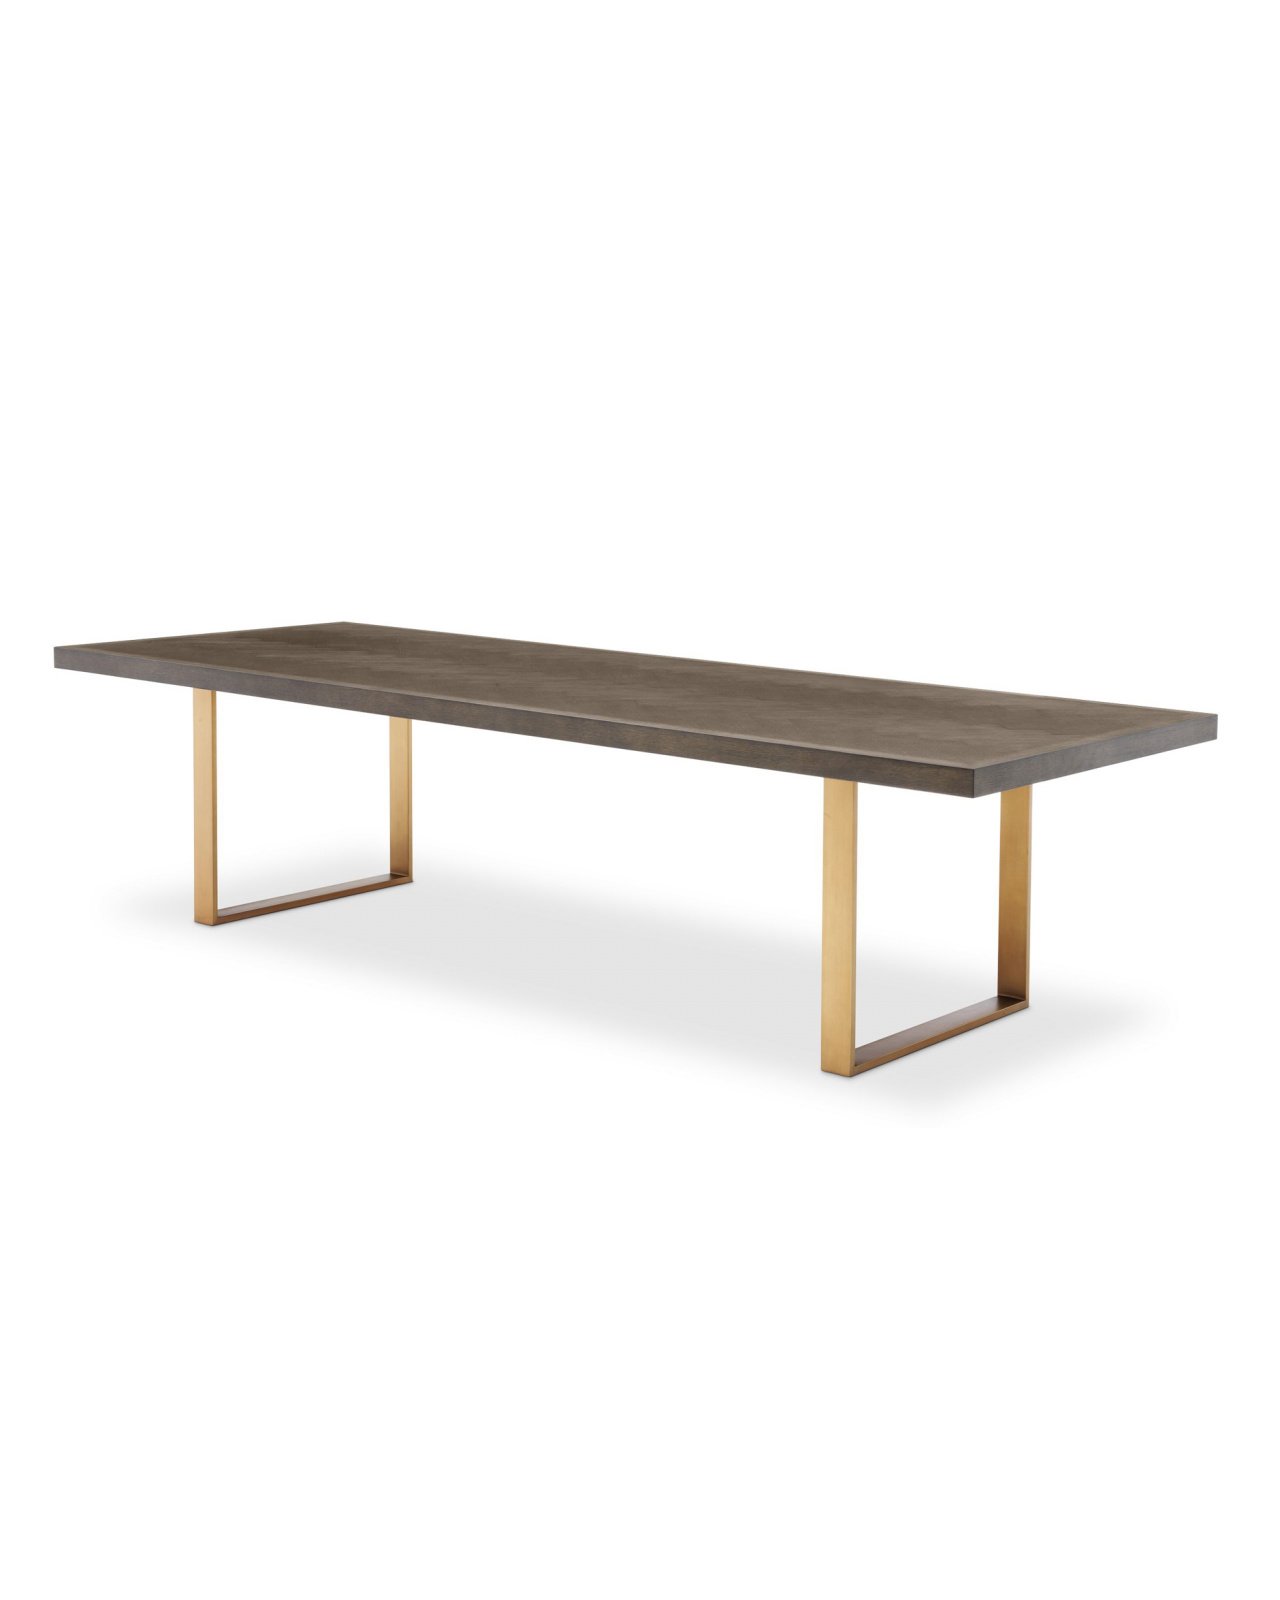 Melchior dining table brown oak